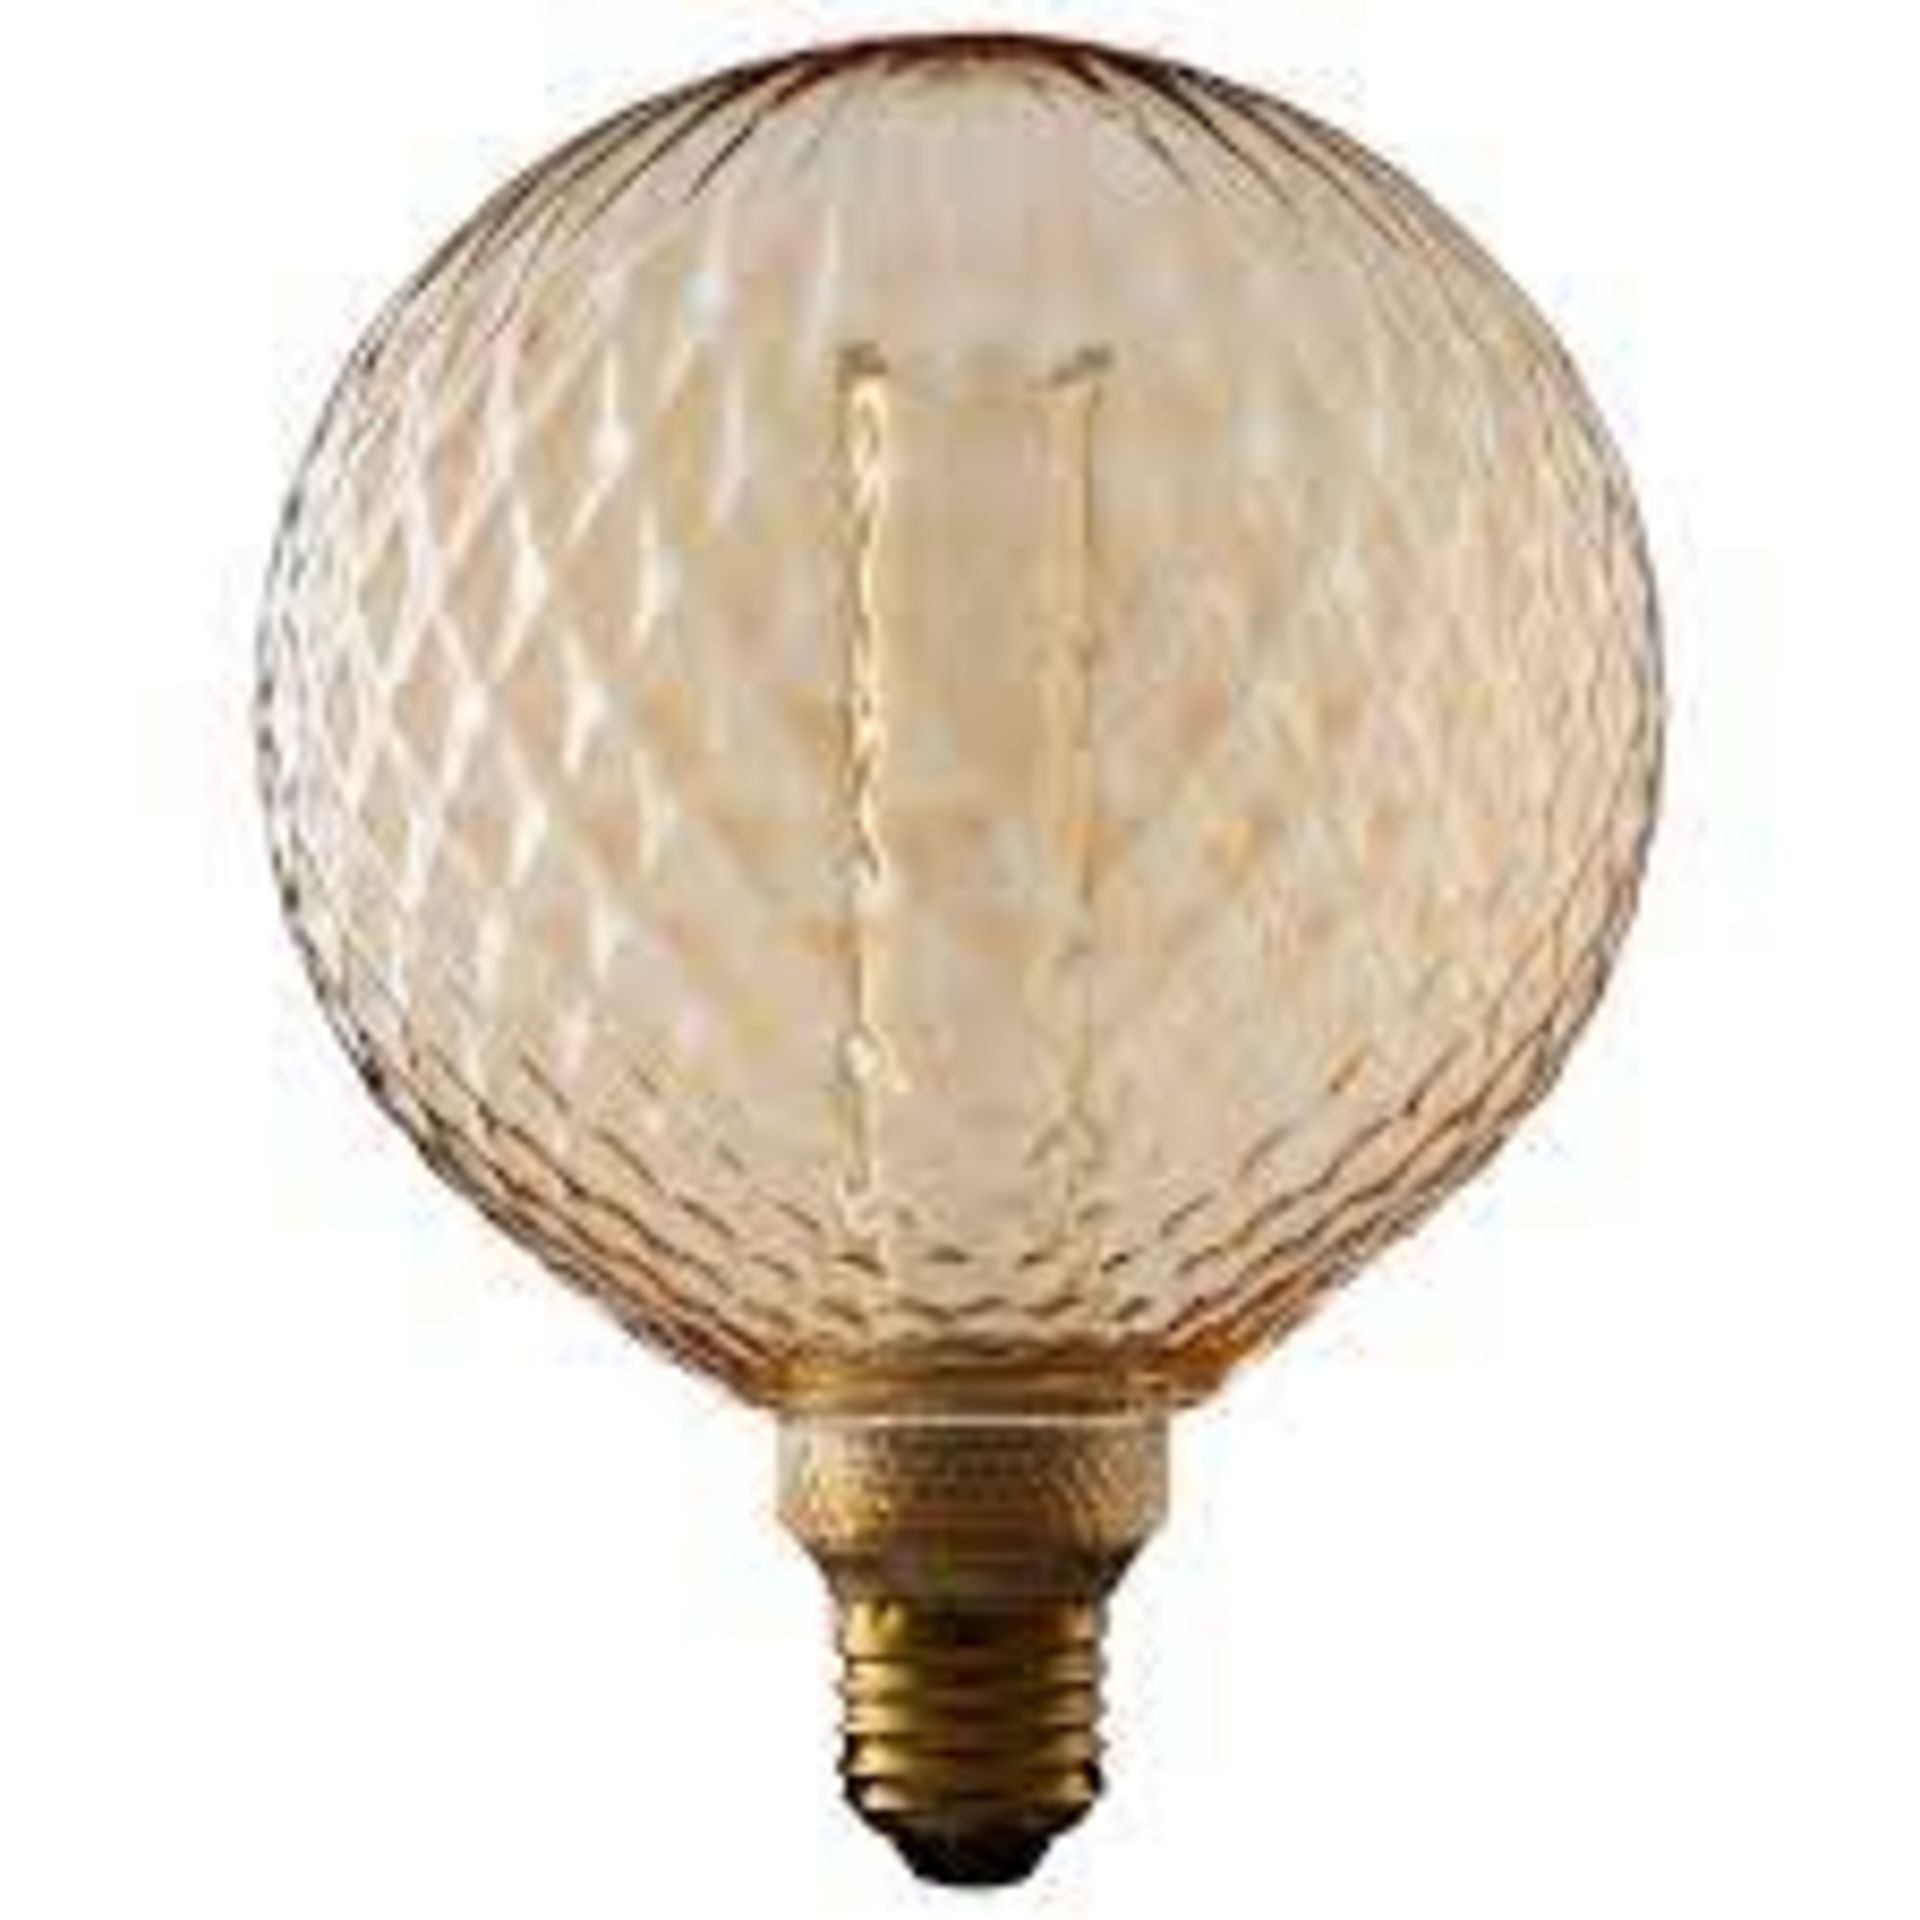 50 X BRAND NEW TCP VINTAGE LIGHTING RIBBED GLOBE WITH AMBER GLASS AND A WARM WHITE GLOW 120LM 2.5W - Image 3 of 3